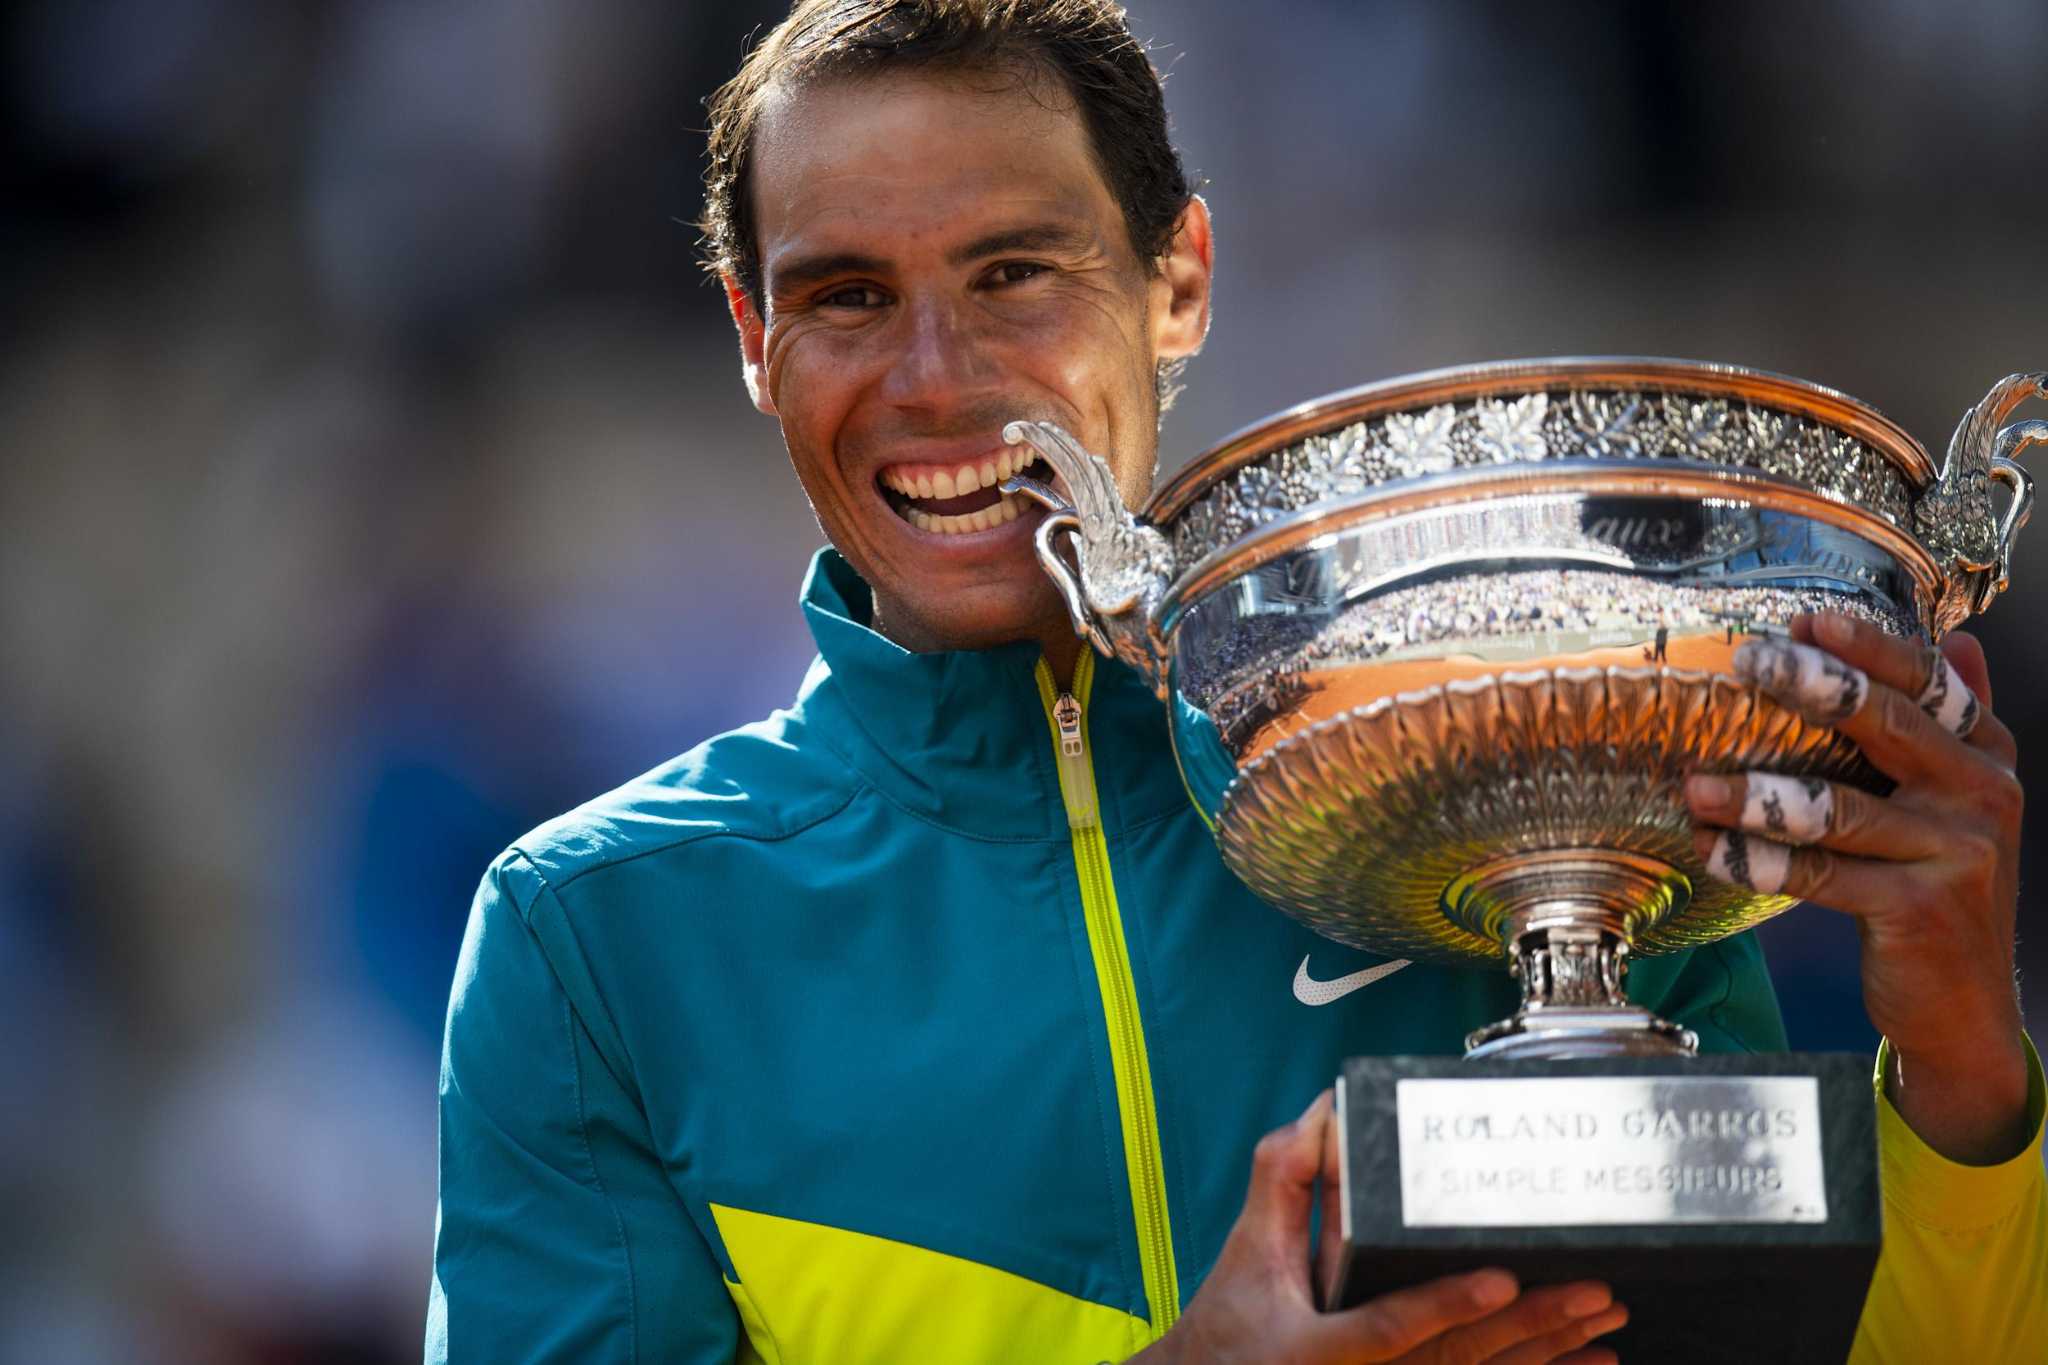 Rafael Nadal cruises to 14th French Open title